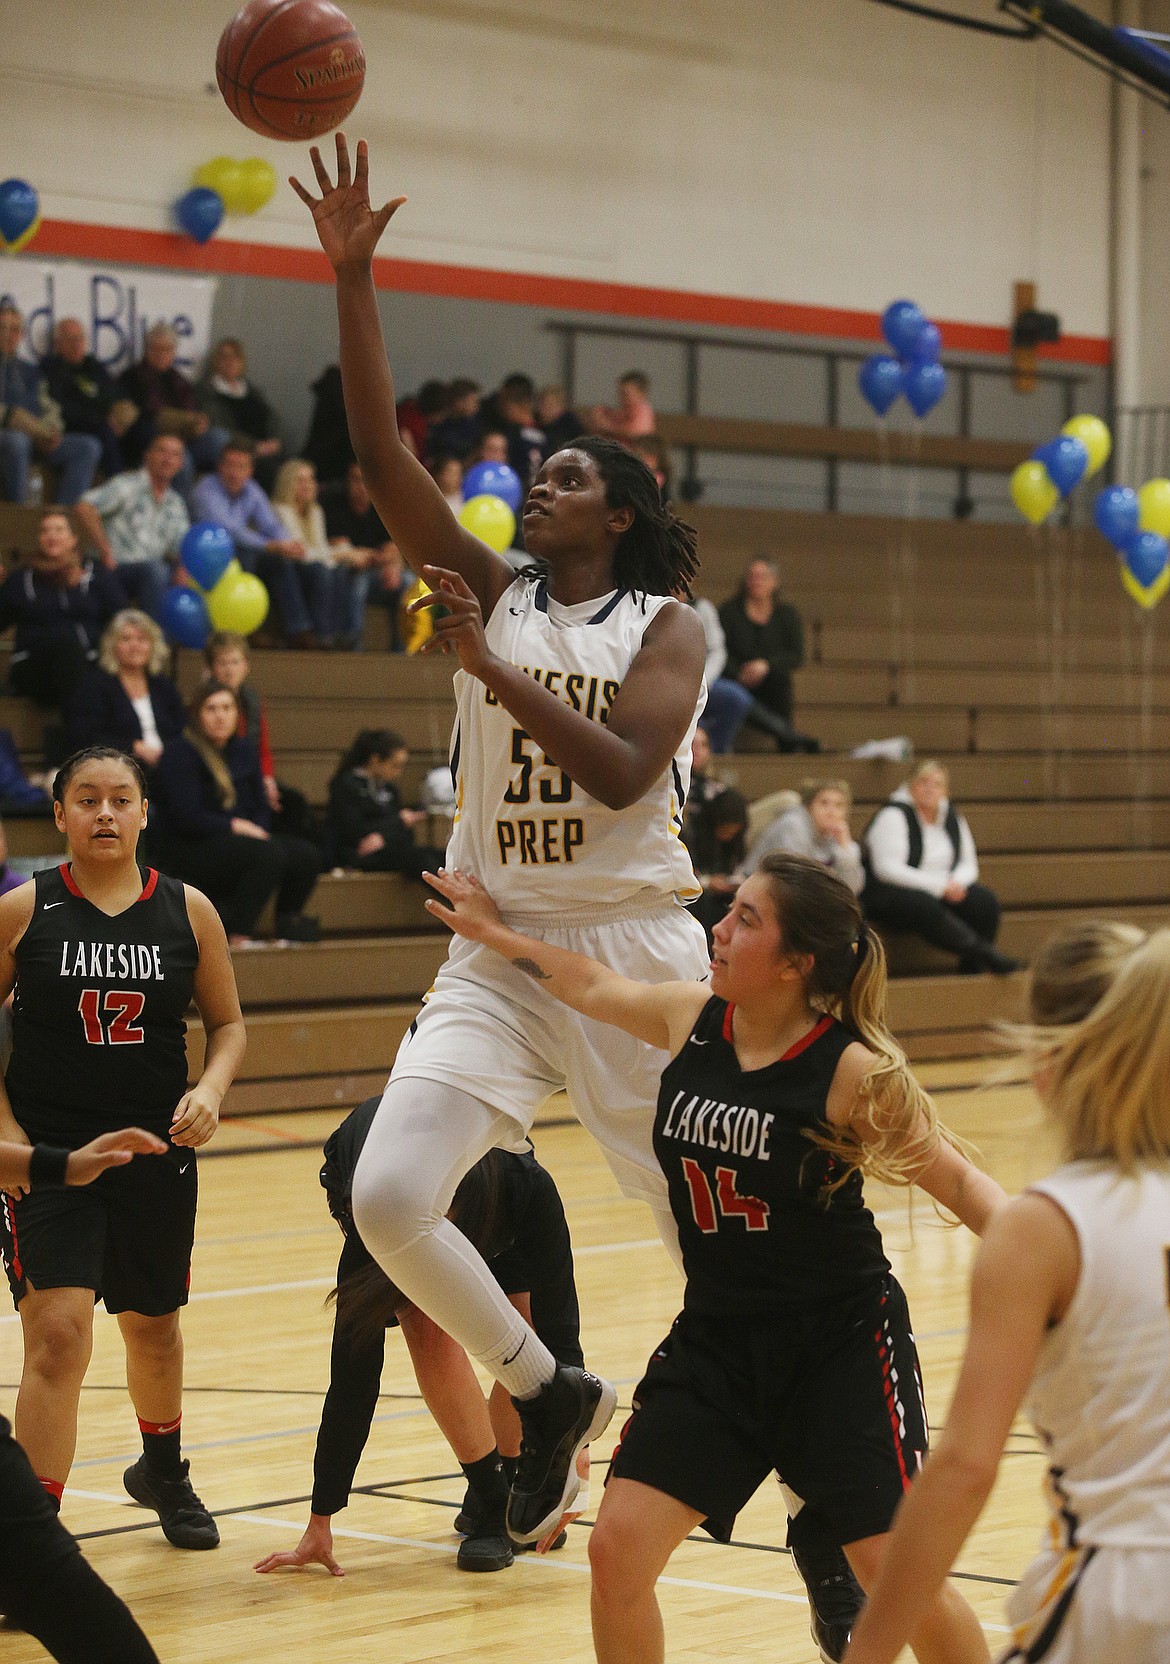 Genesis Prep senior center Bella Murekatete goes for a layup as Suzzana Pakootas (12) and Alyssa SiJohn (14) of Lakeside look on Friday night at Post Falls Middle School.